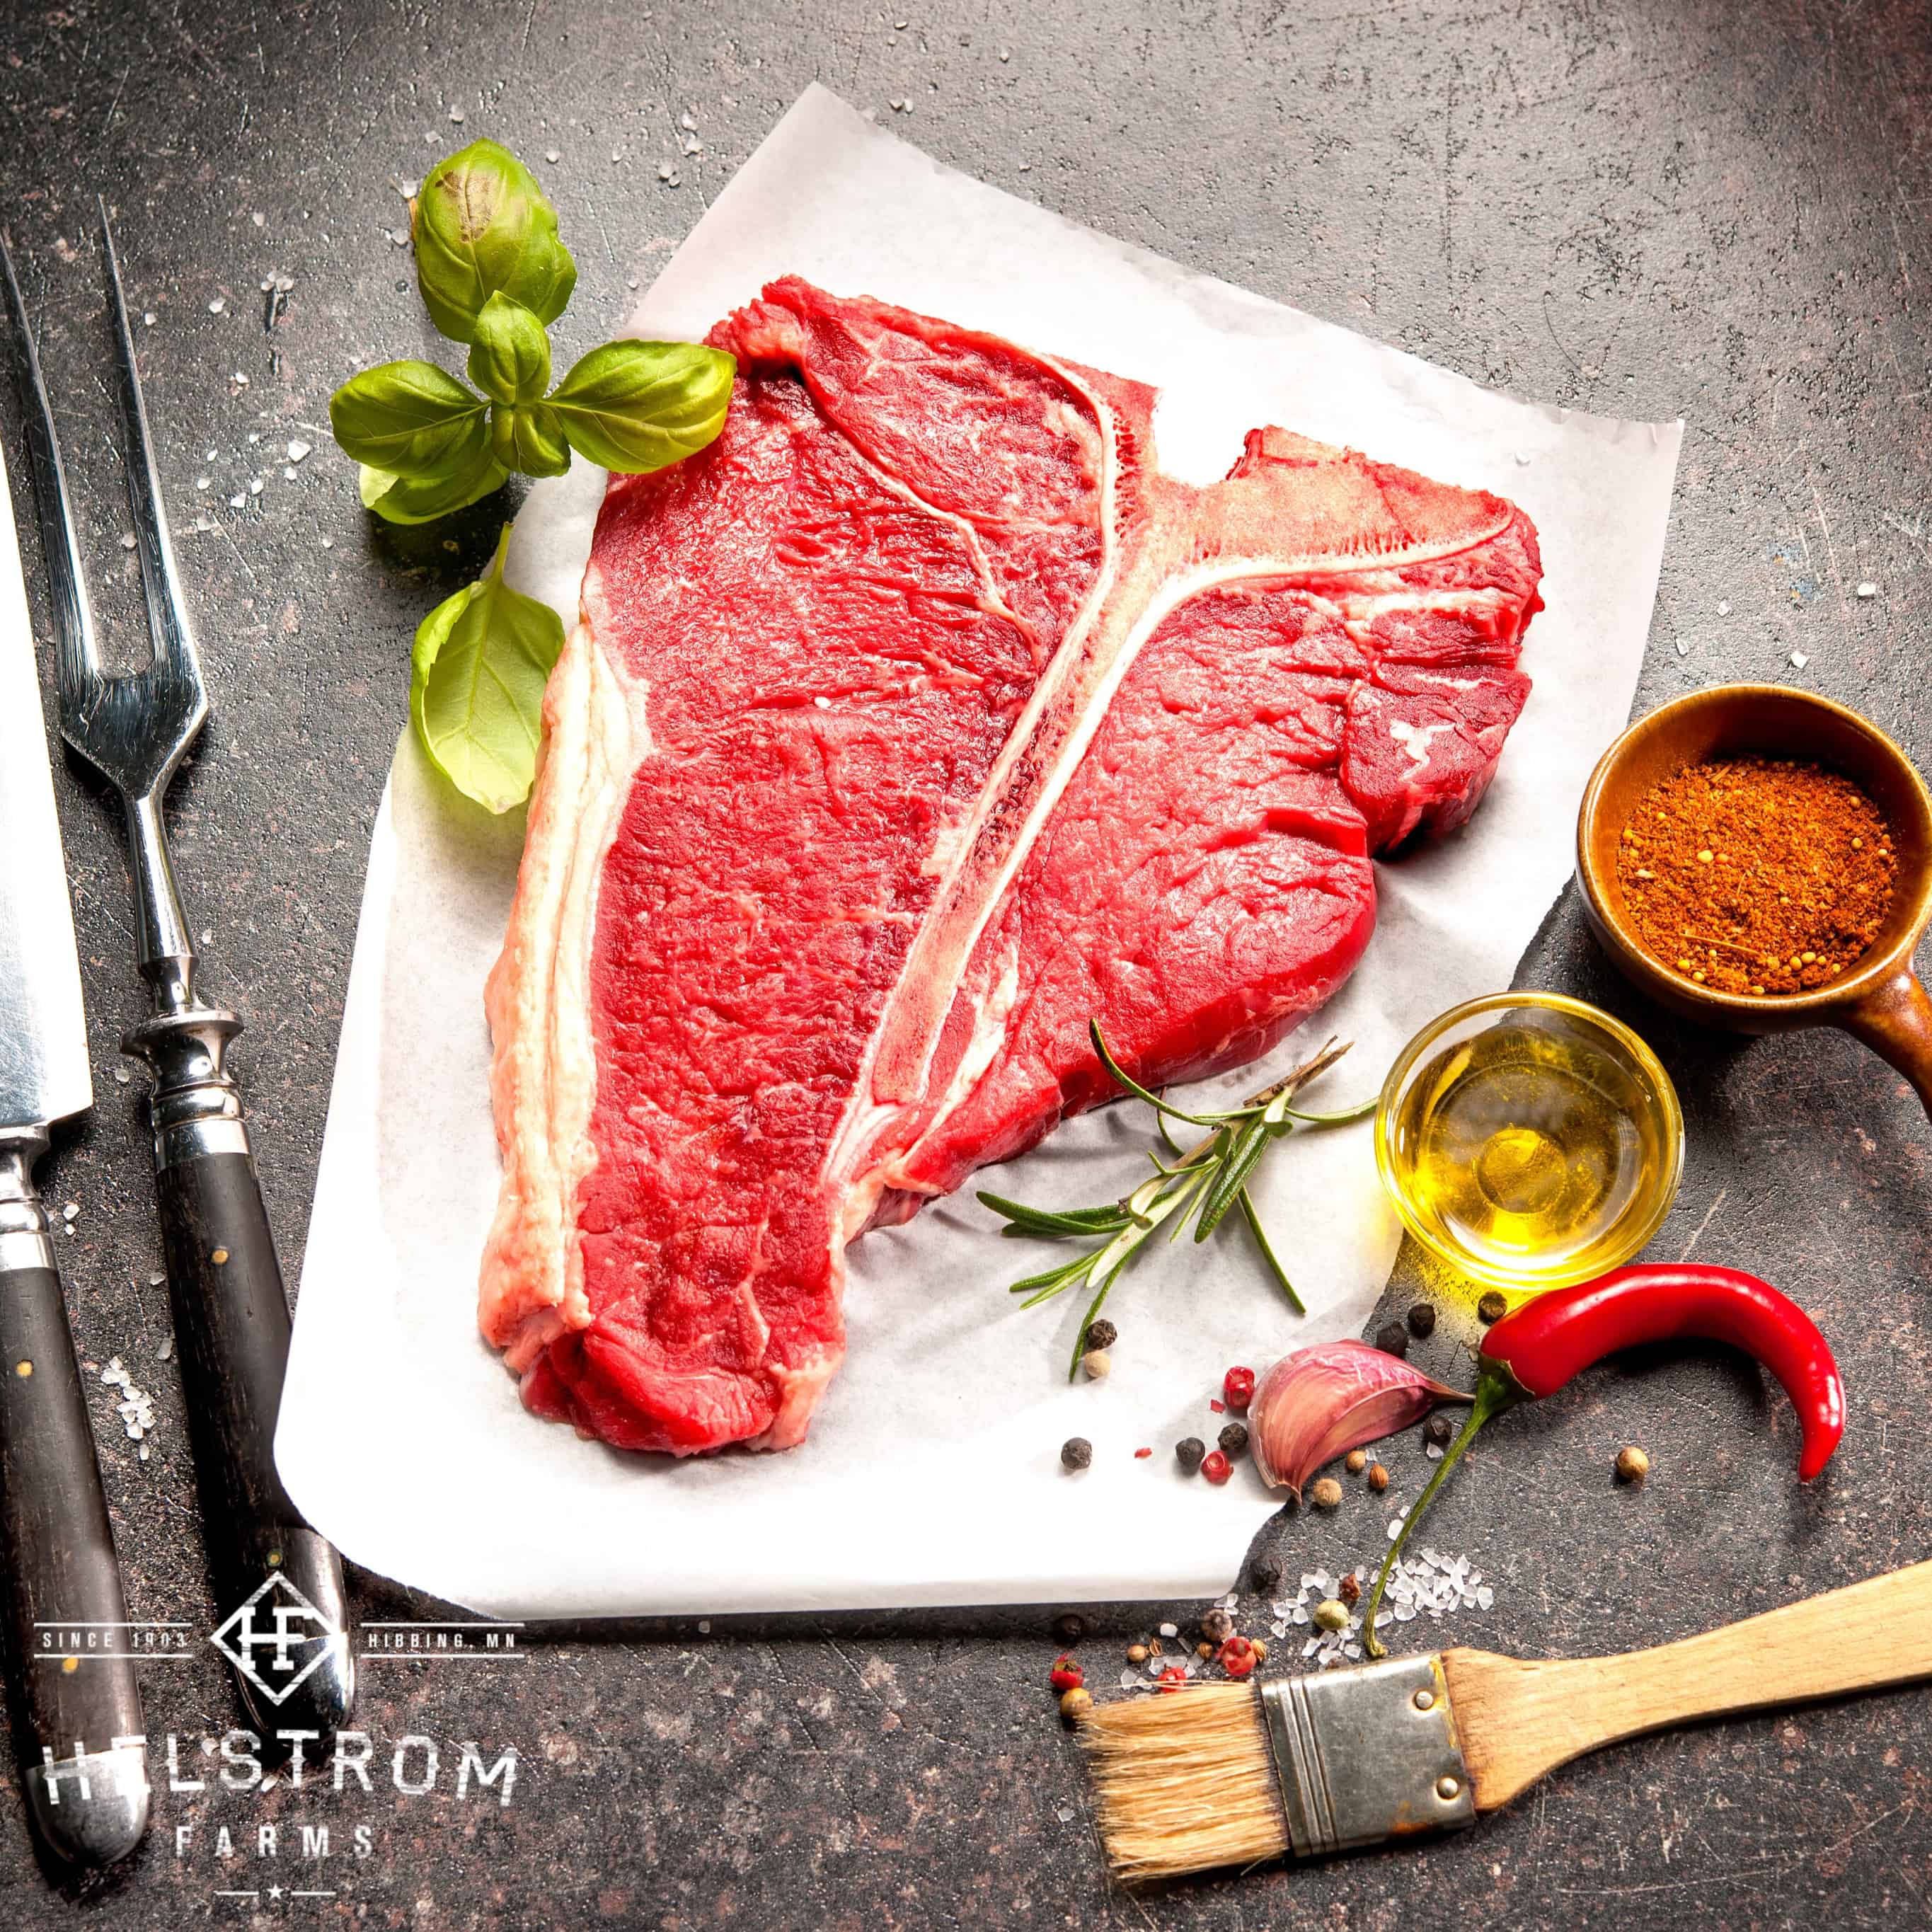 Why We Eat Grass Fed Beef From Helstrom Farms